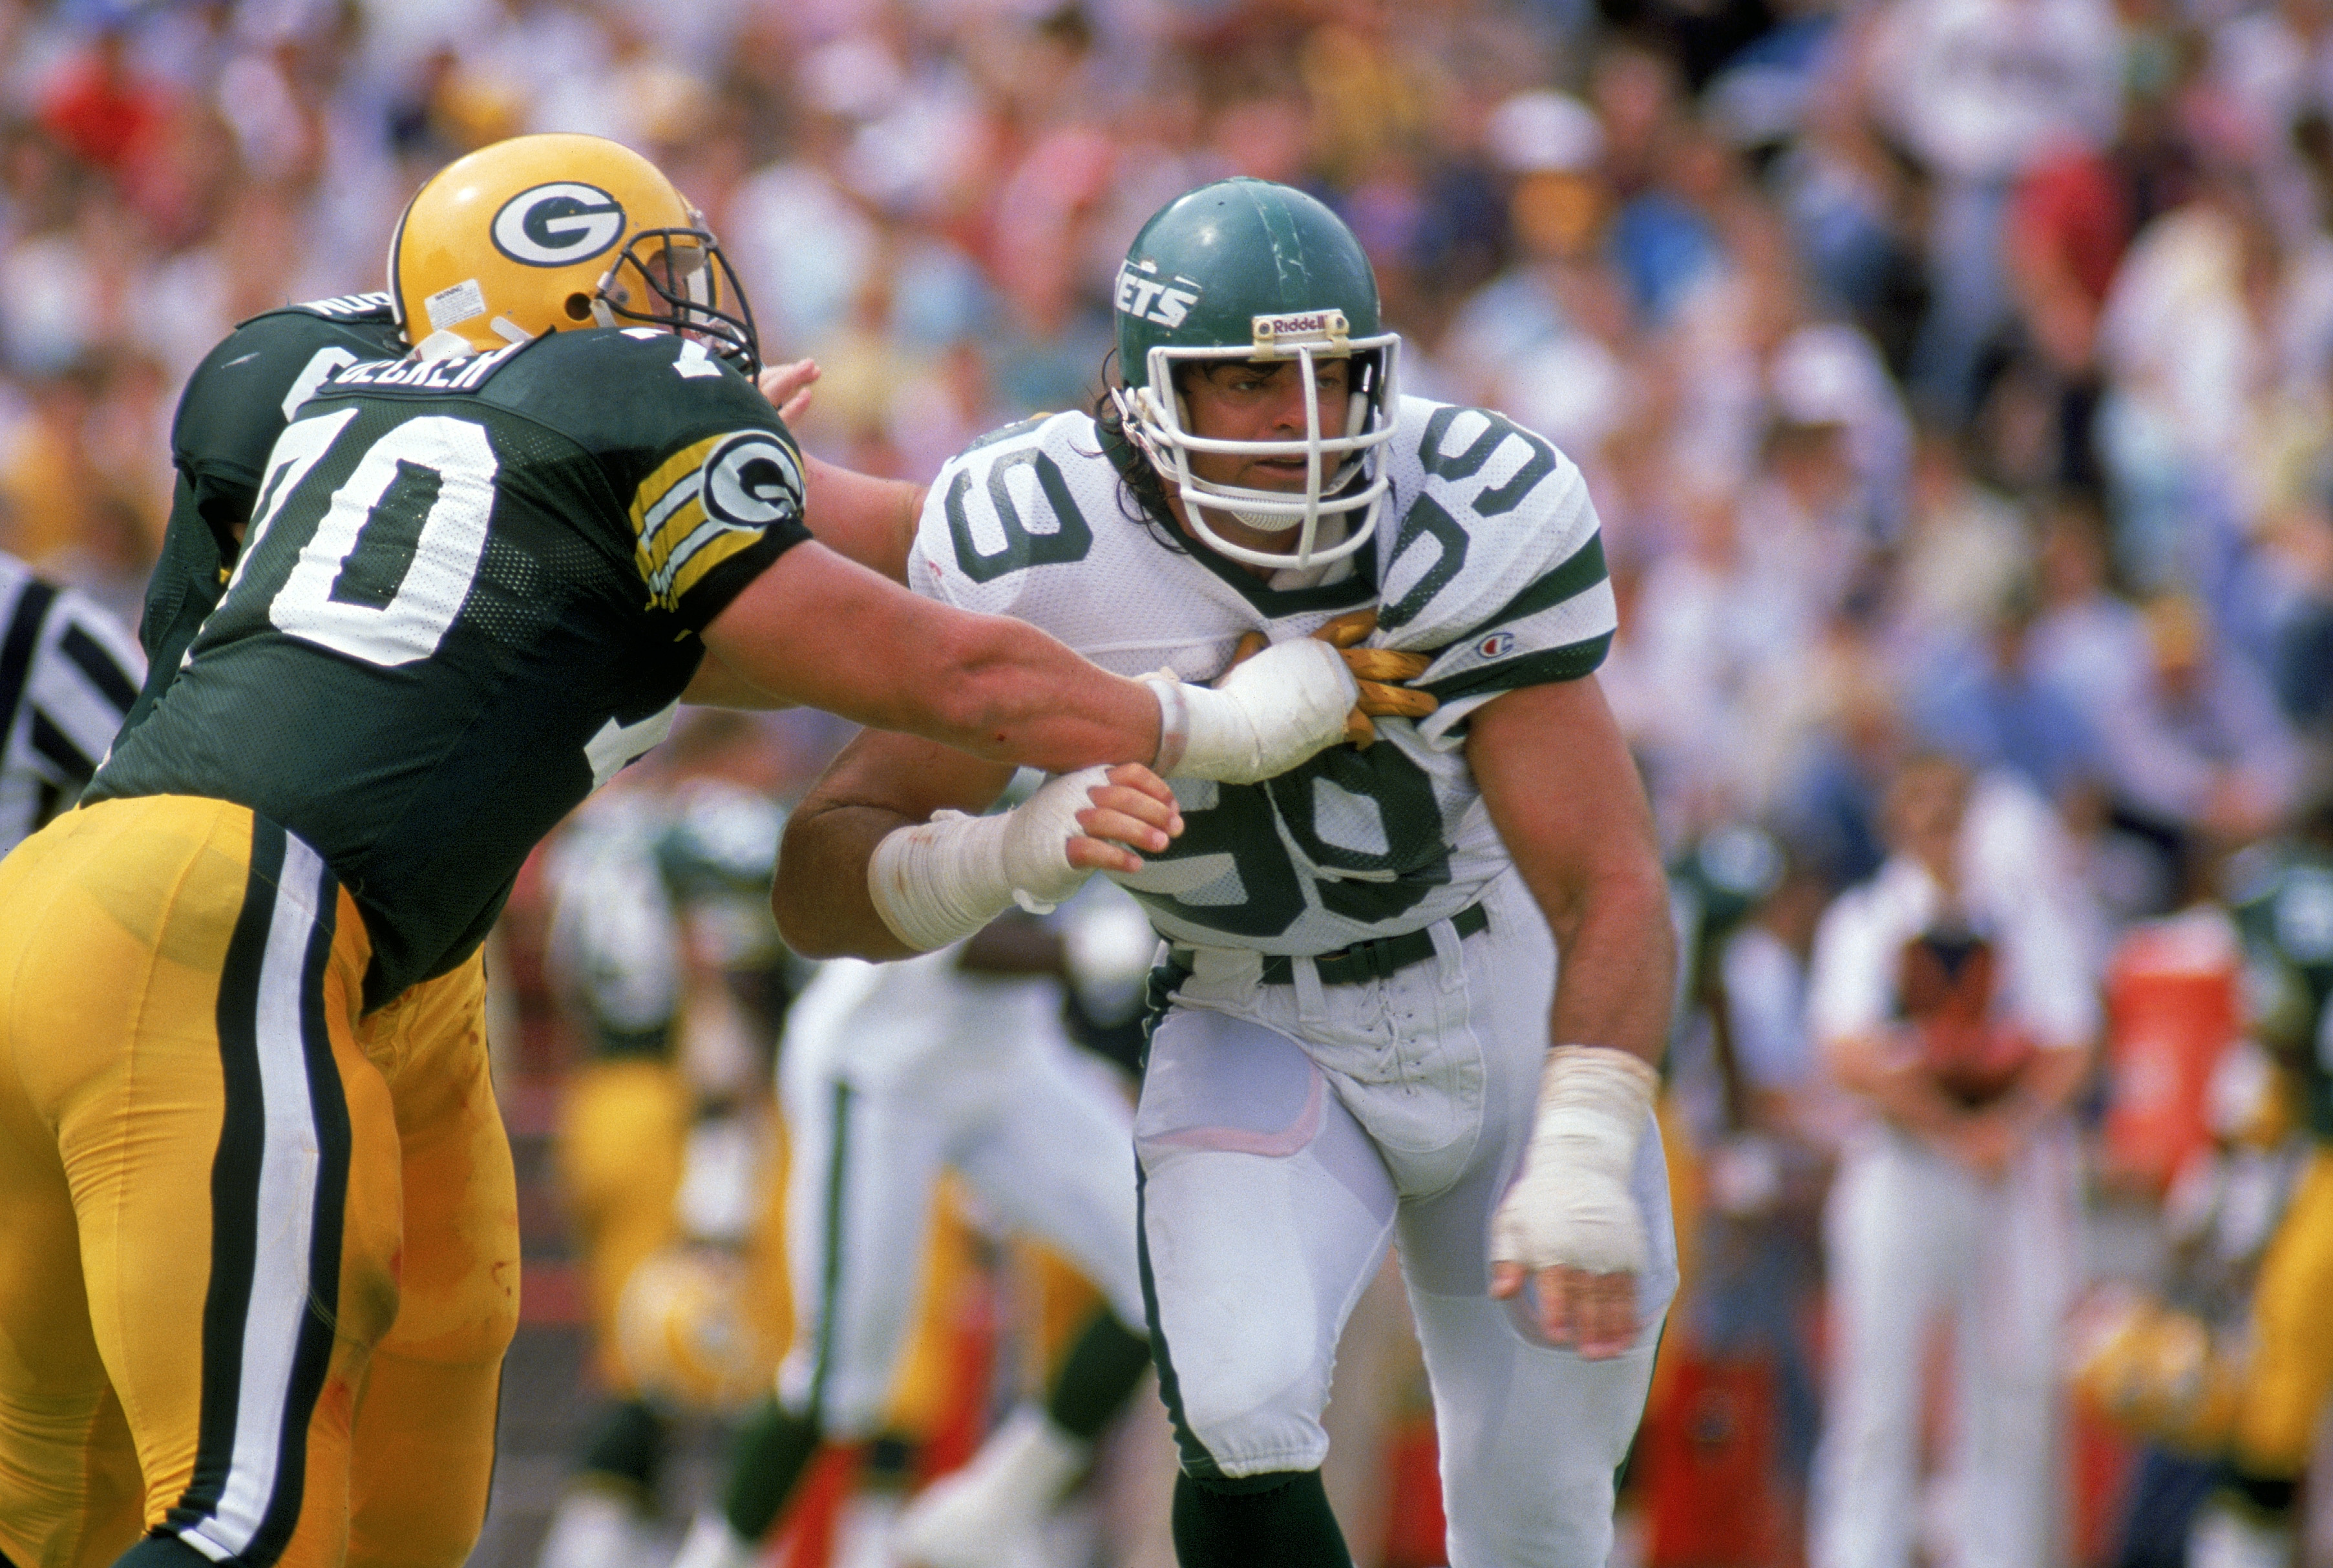 New York Jets: Former great Mark Gastineau in poor health, begs NFL to do  right